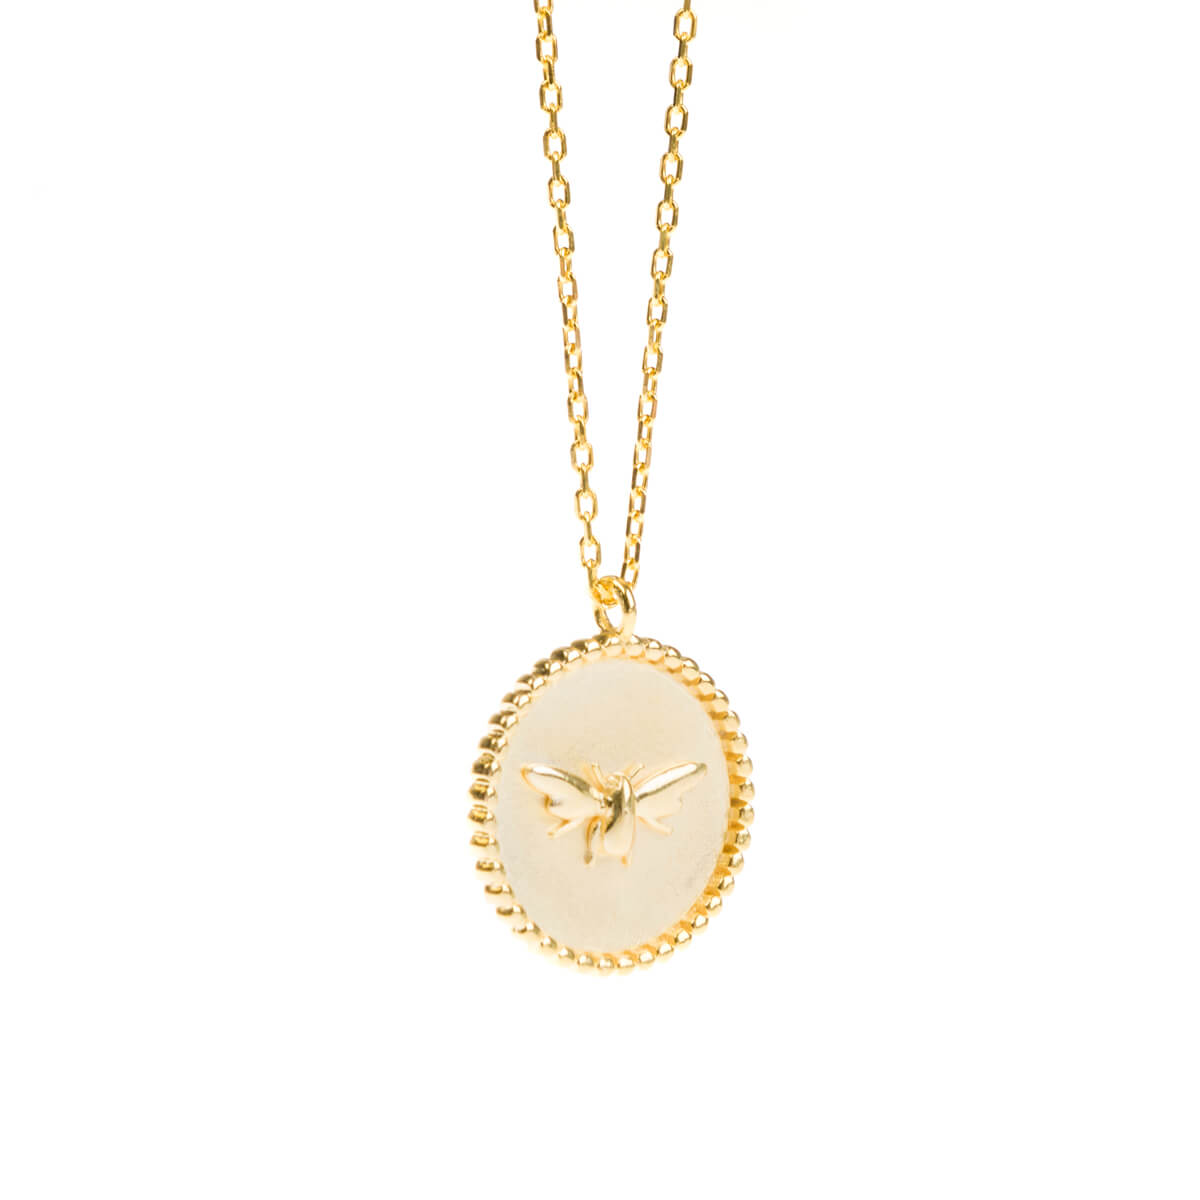 Bees Gold Plated Pendant Necklace